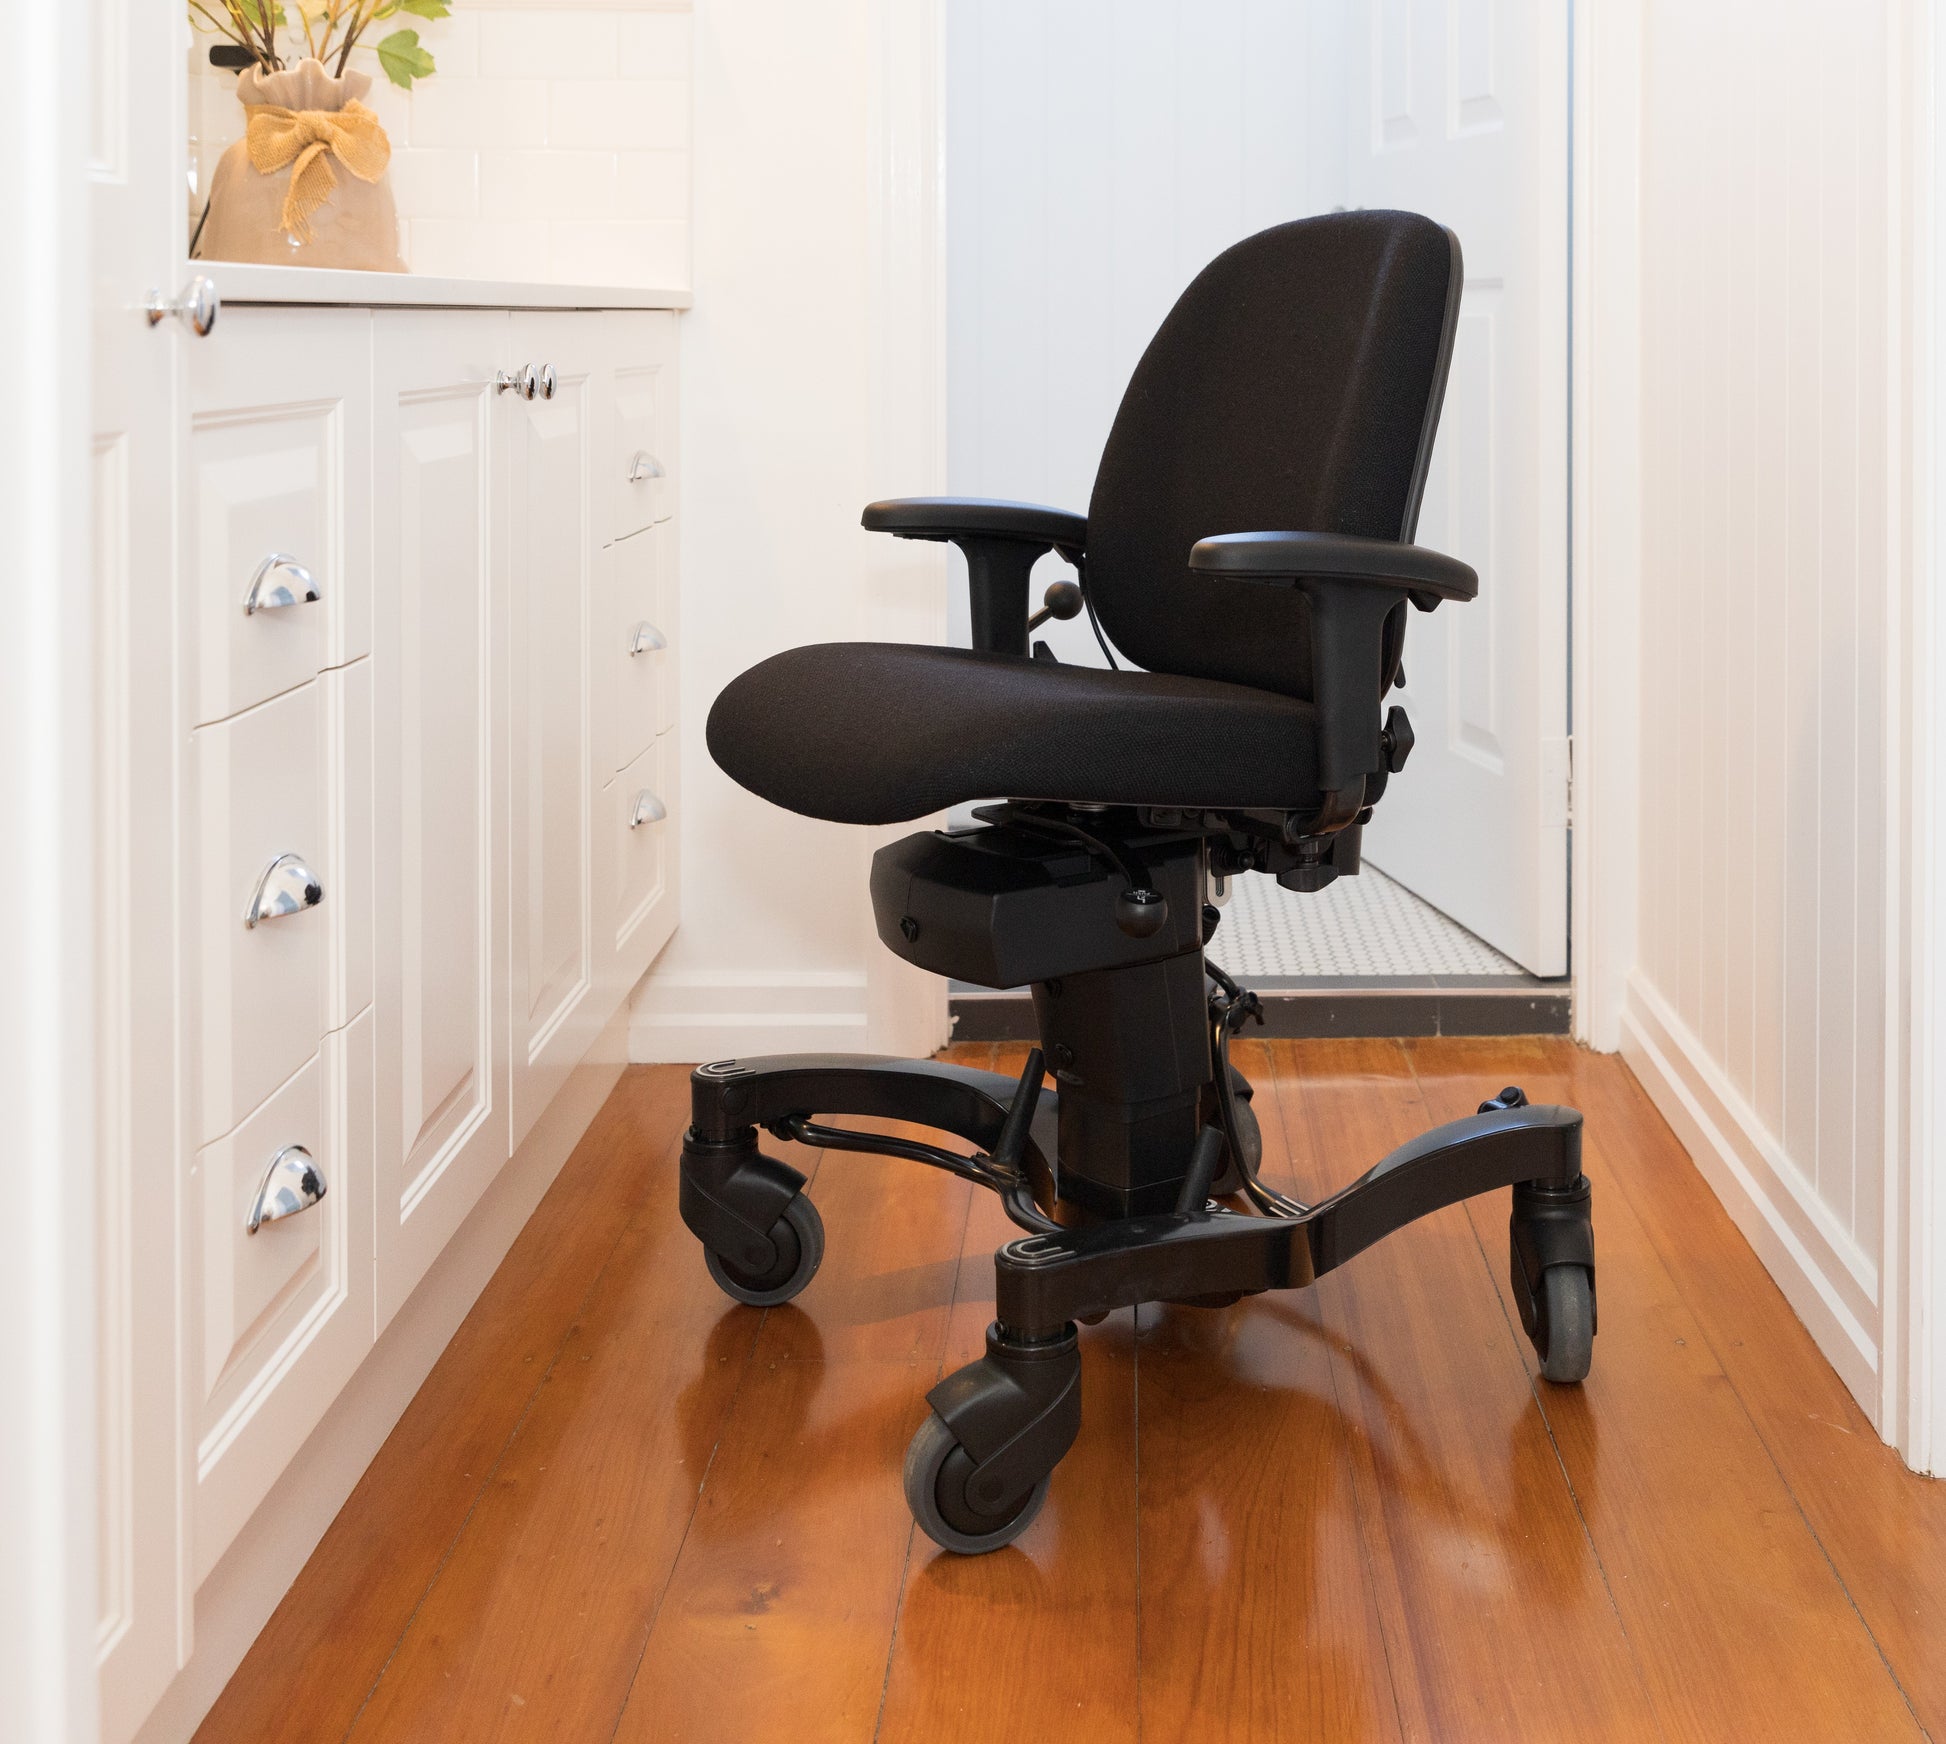 Quality office chair with brake and electric lift from VELA. Find it here